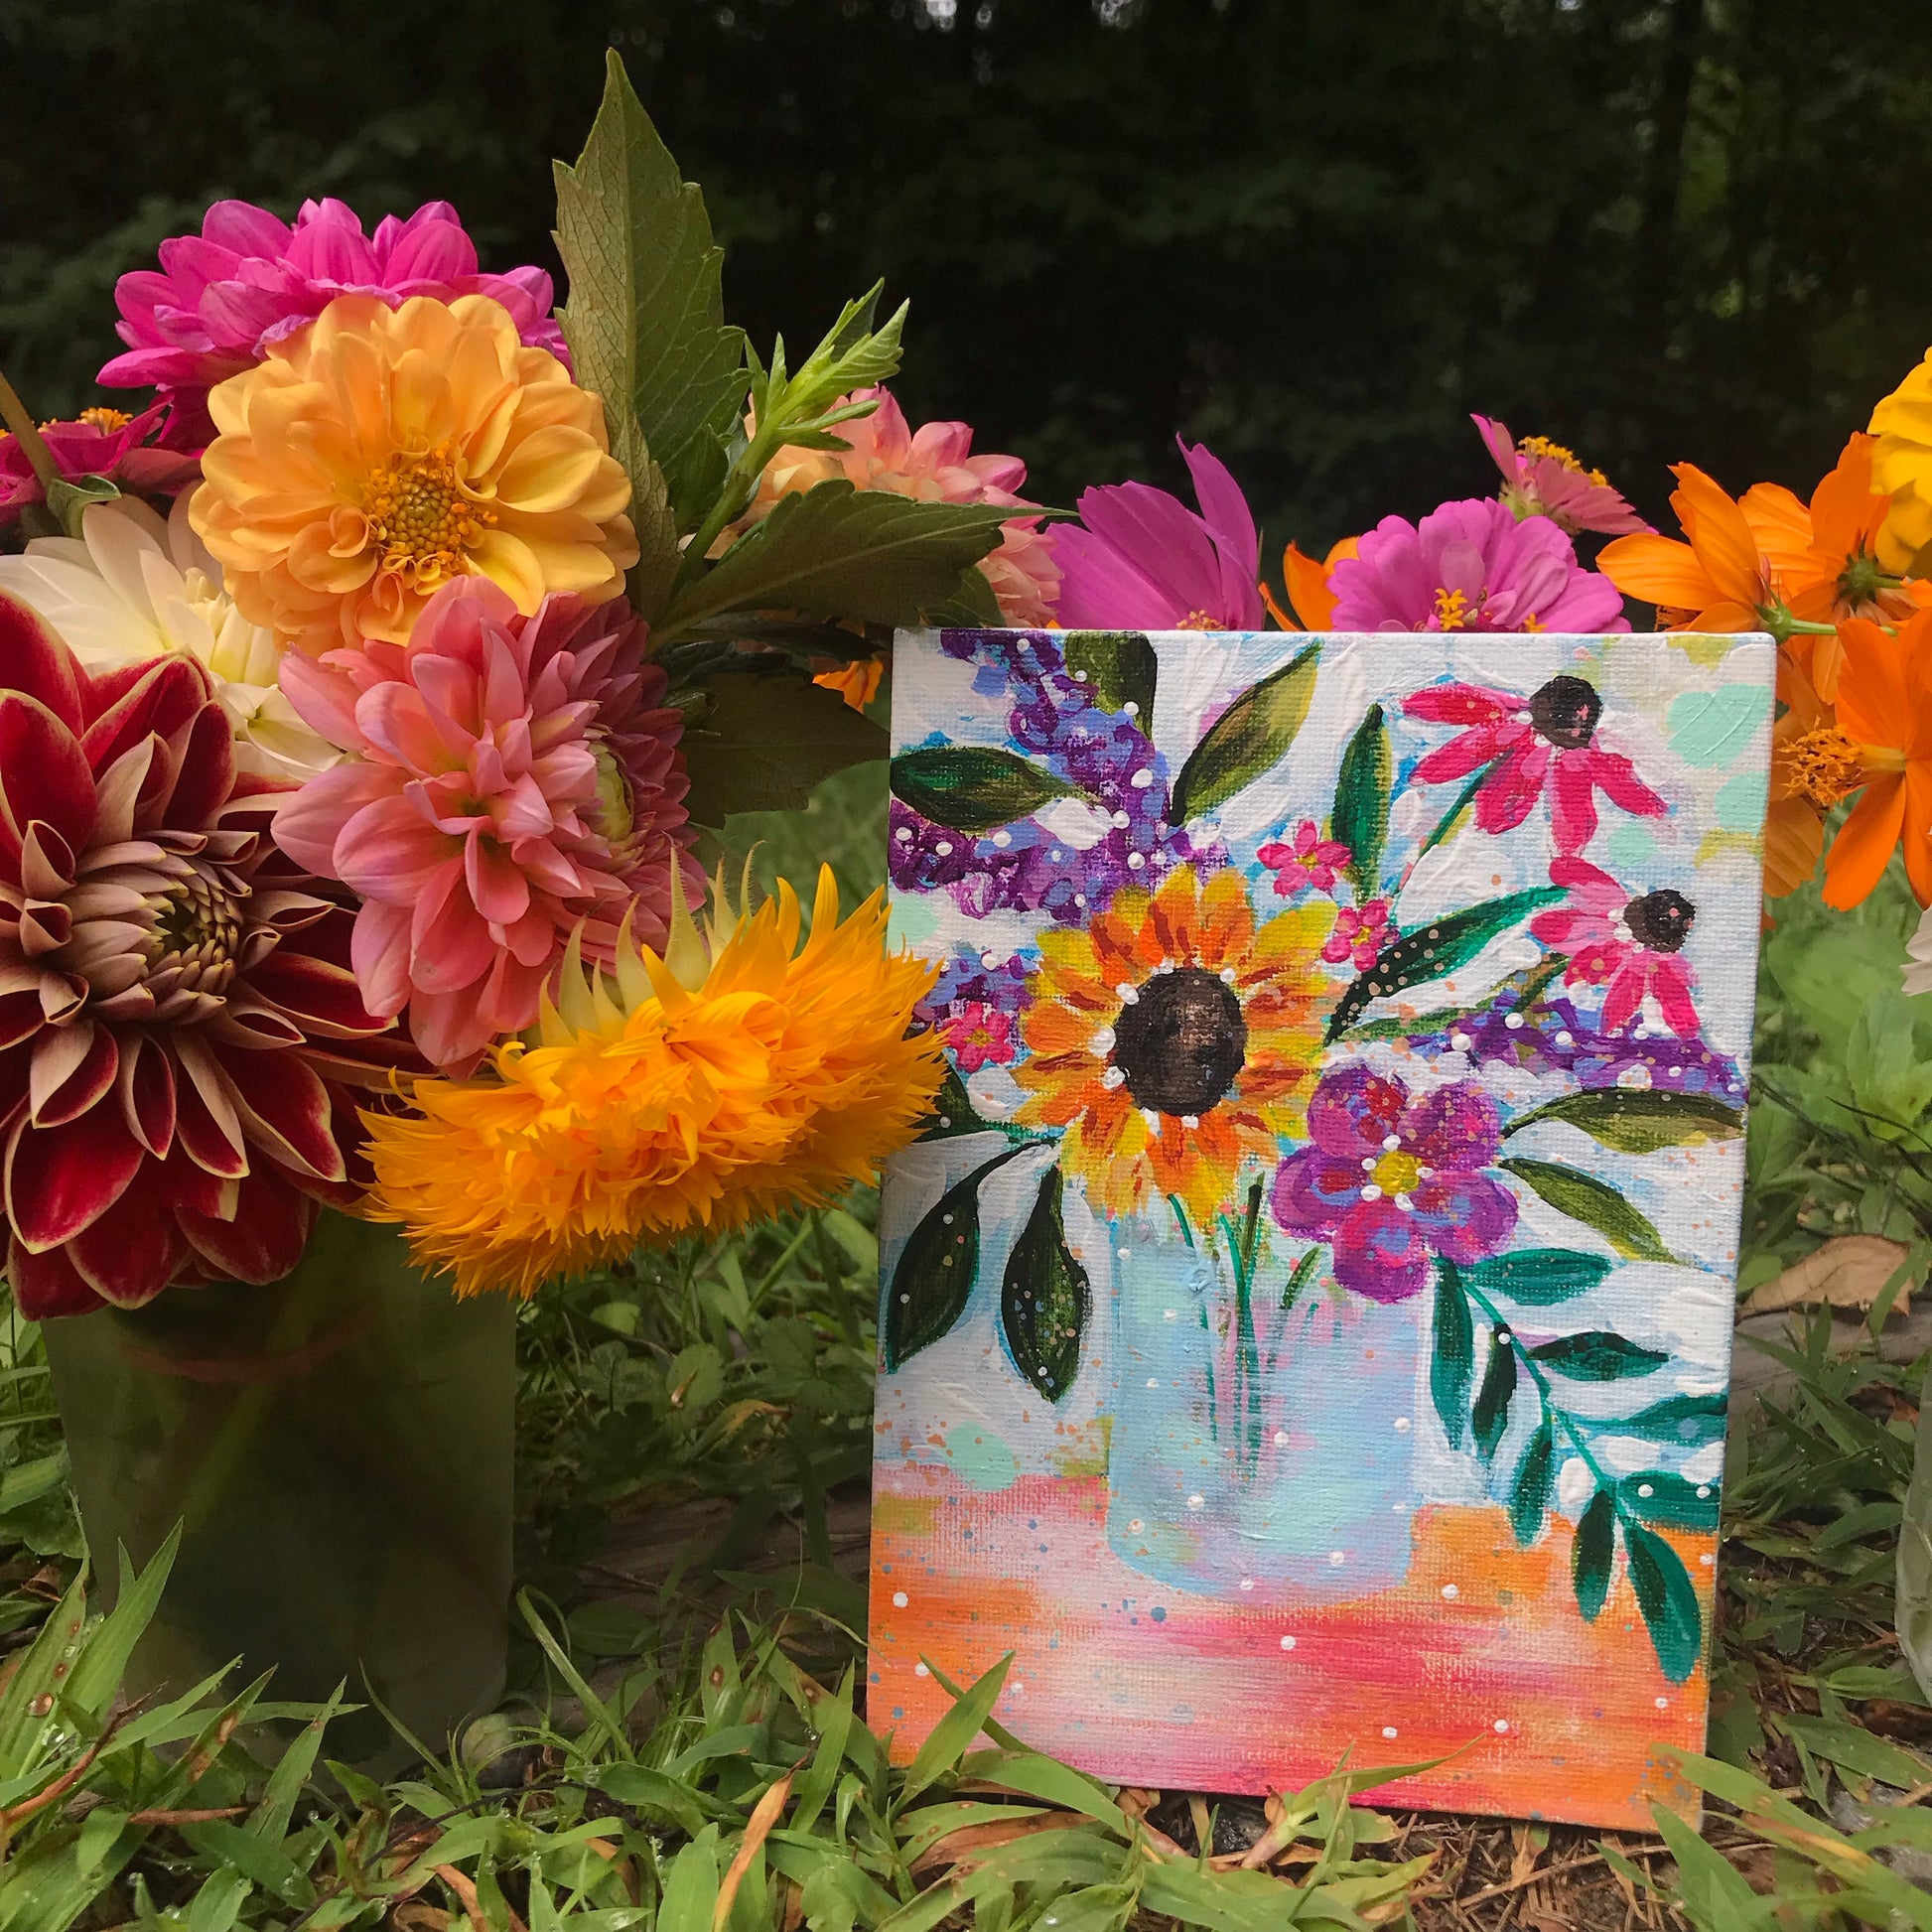 August Daily Painting Day 8 “It's a Smile” 5x7 inch Floral Original - Bethany Joy Art